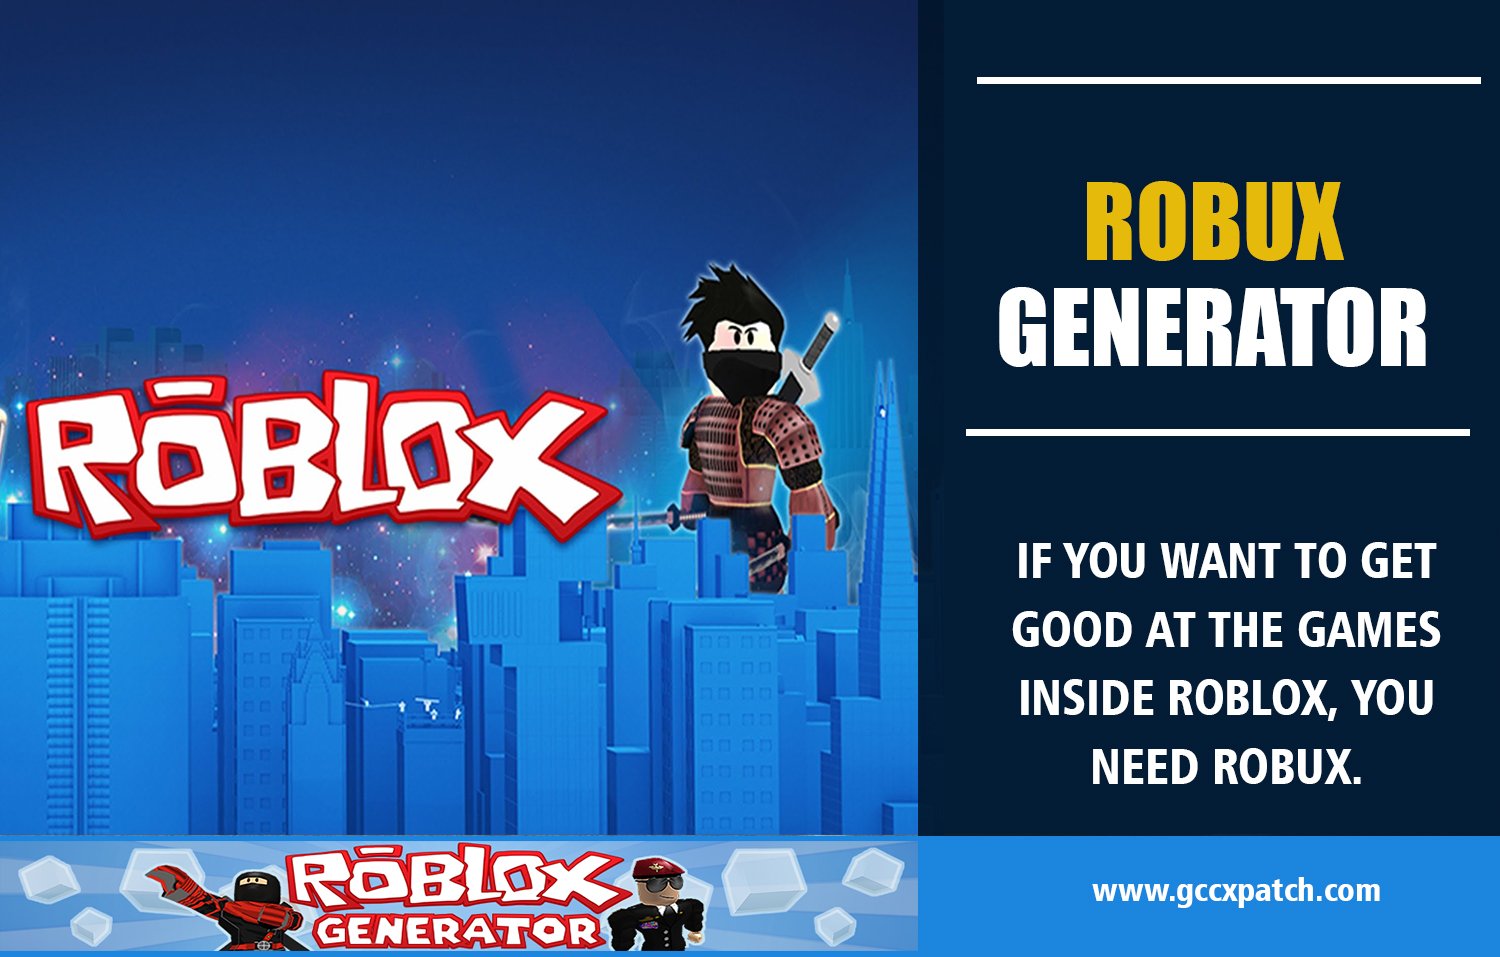 robux generator on X: Free Robux along with tickets are the two main  currencies in Roblox at  Service:- robux generator  free robux how to get free robux how to get robux